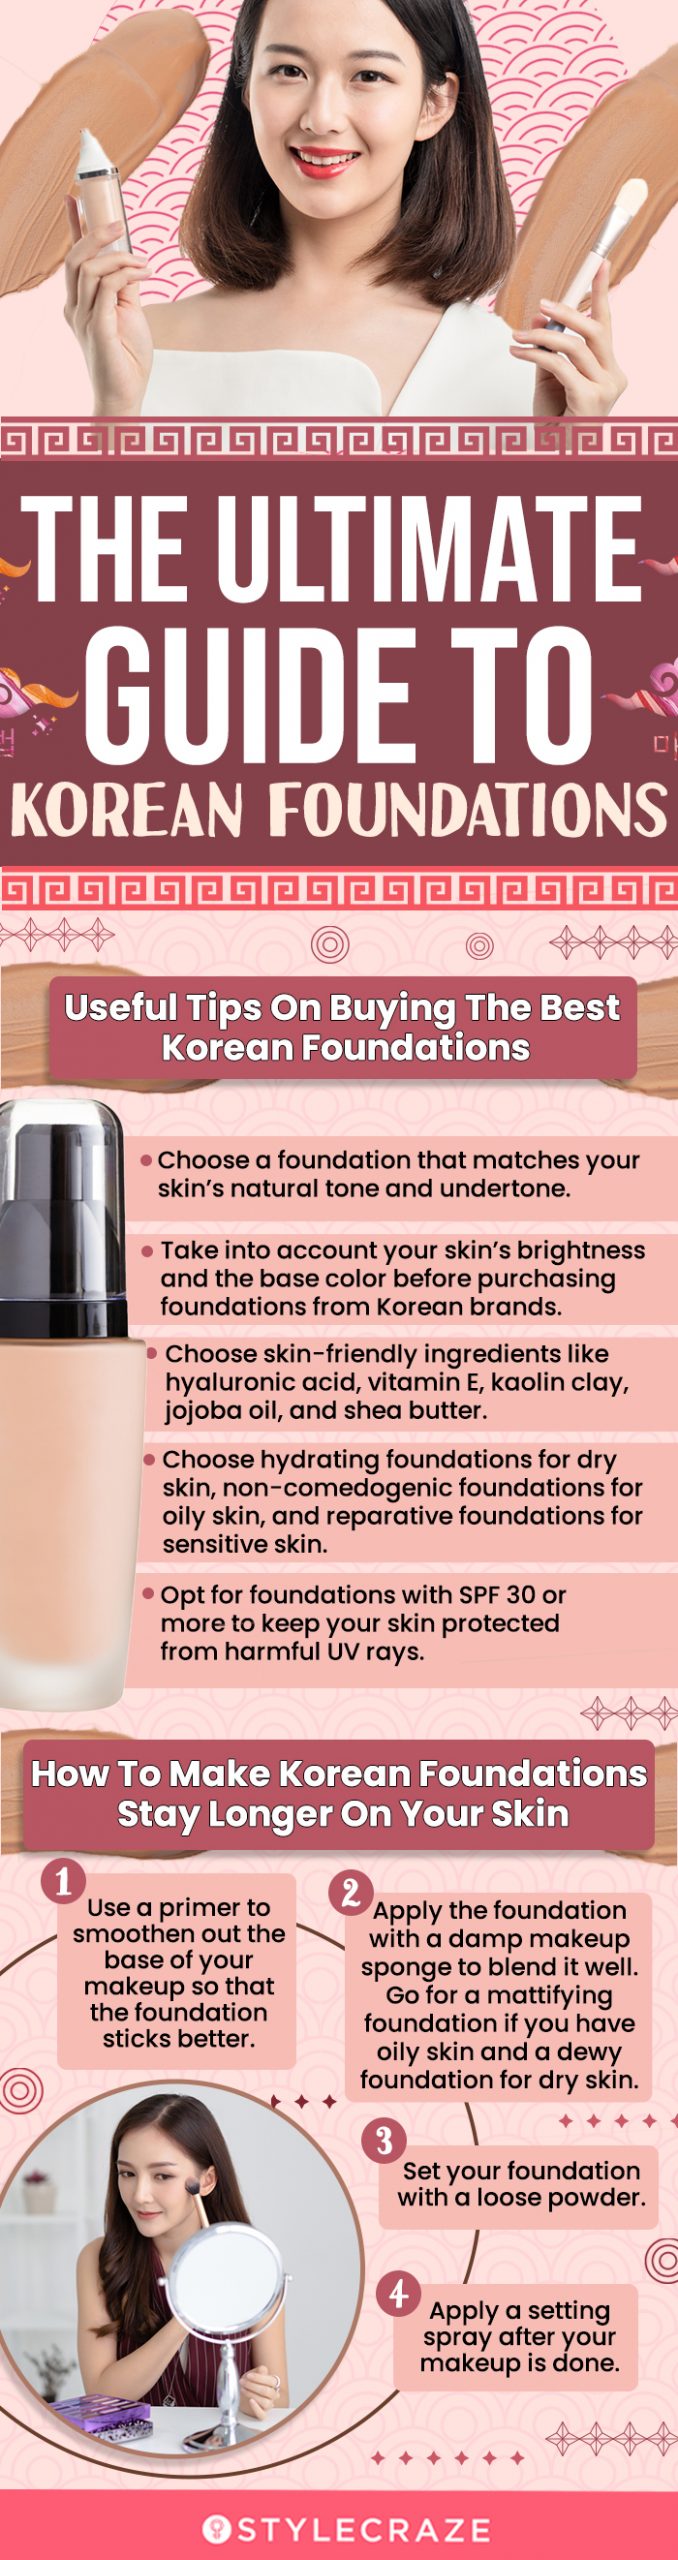 A Guide To Korean Foundations: Buying Tips & How To Make Them Last Longer (infographic)